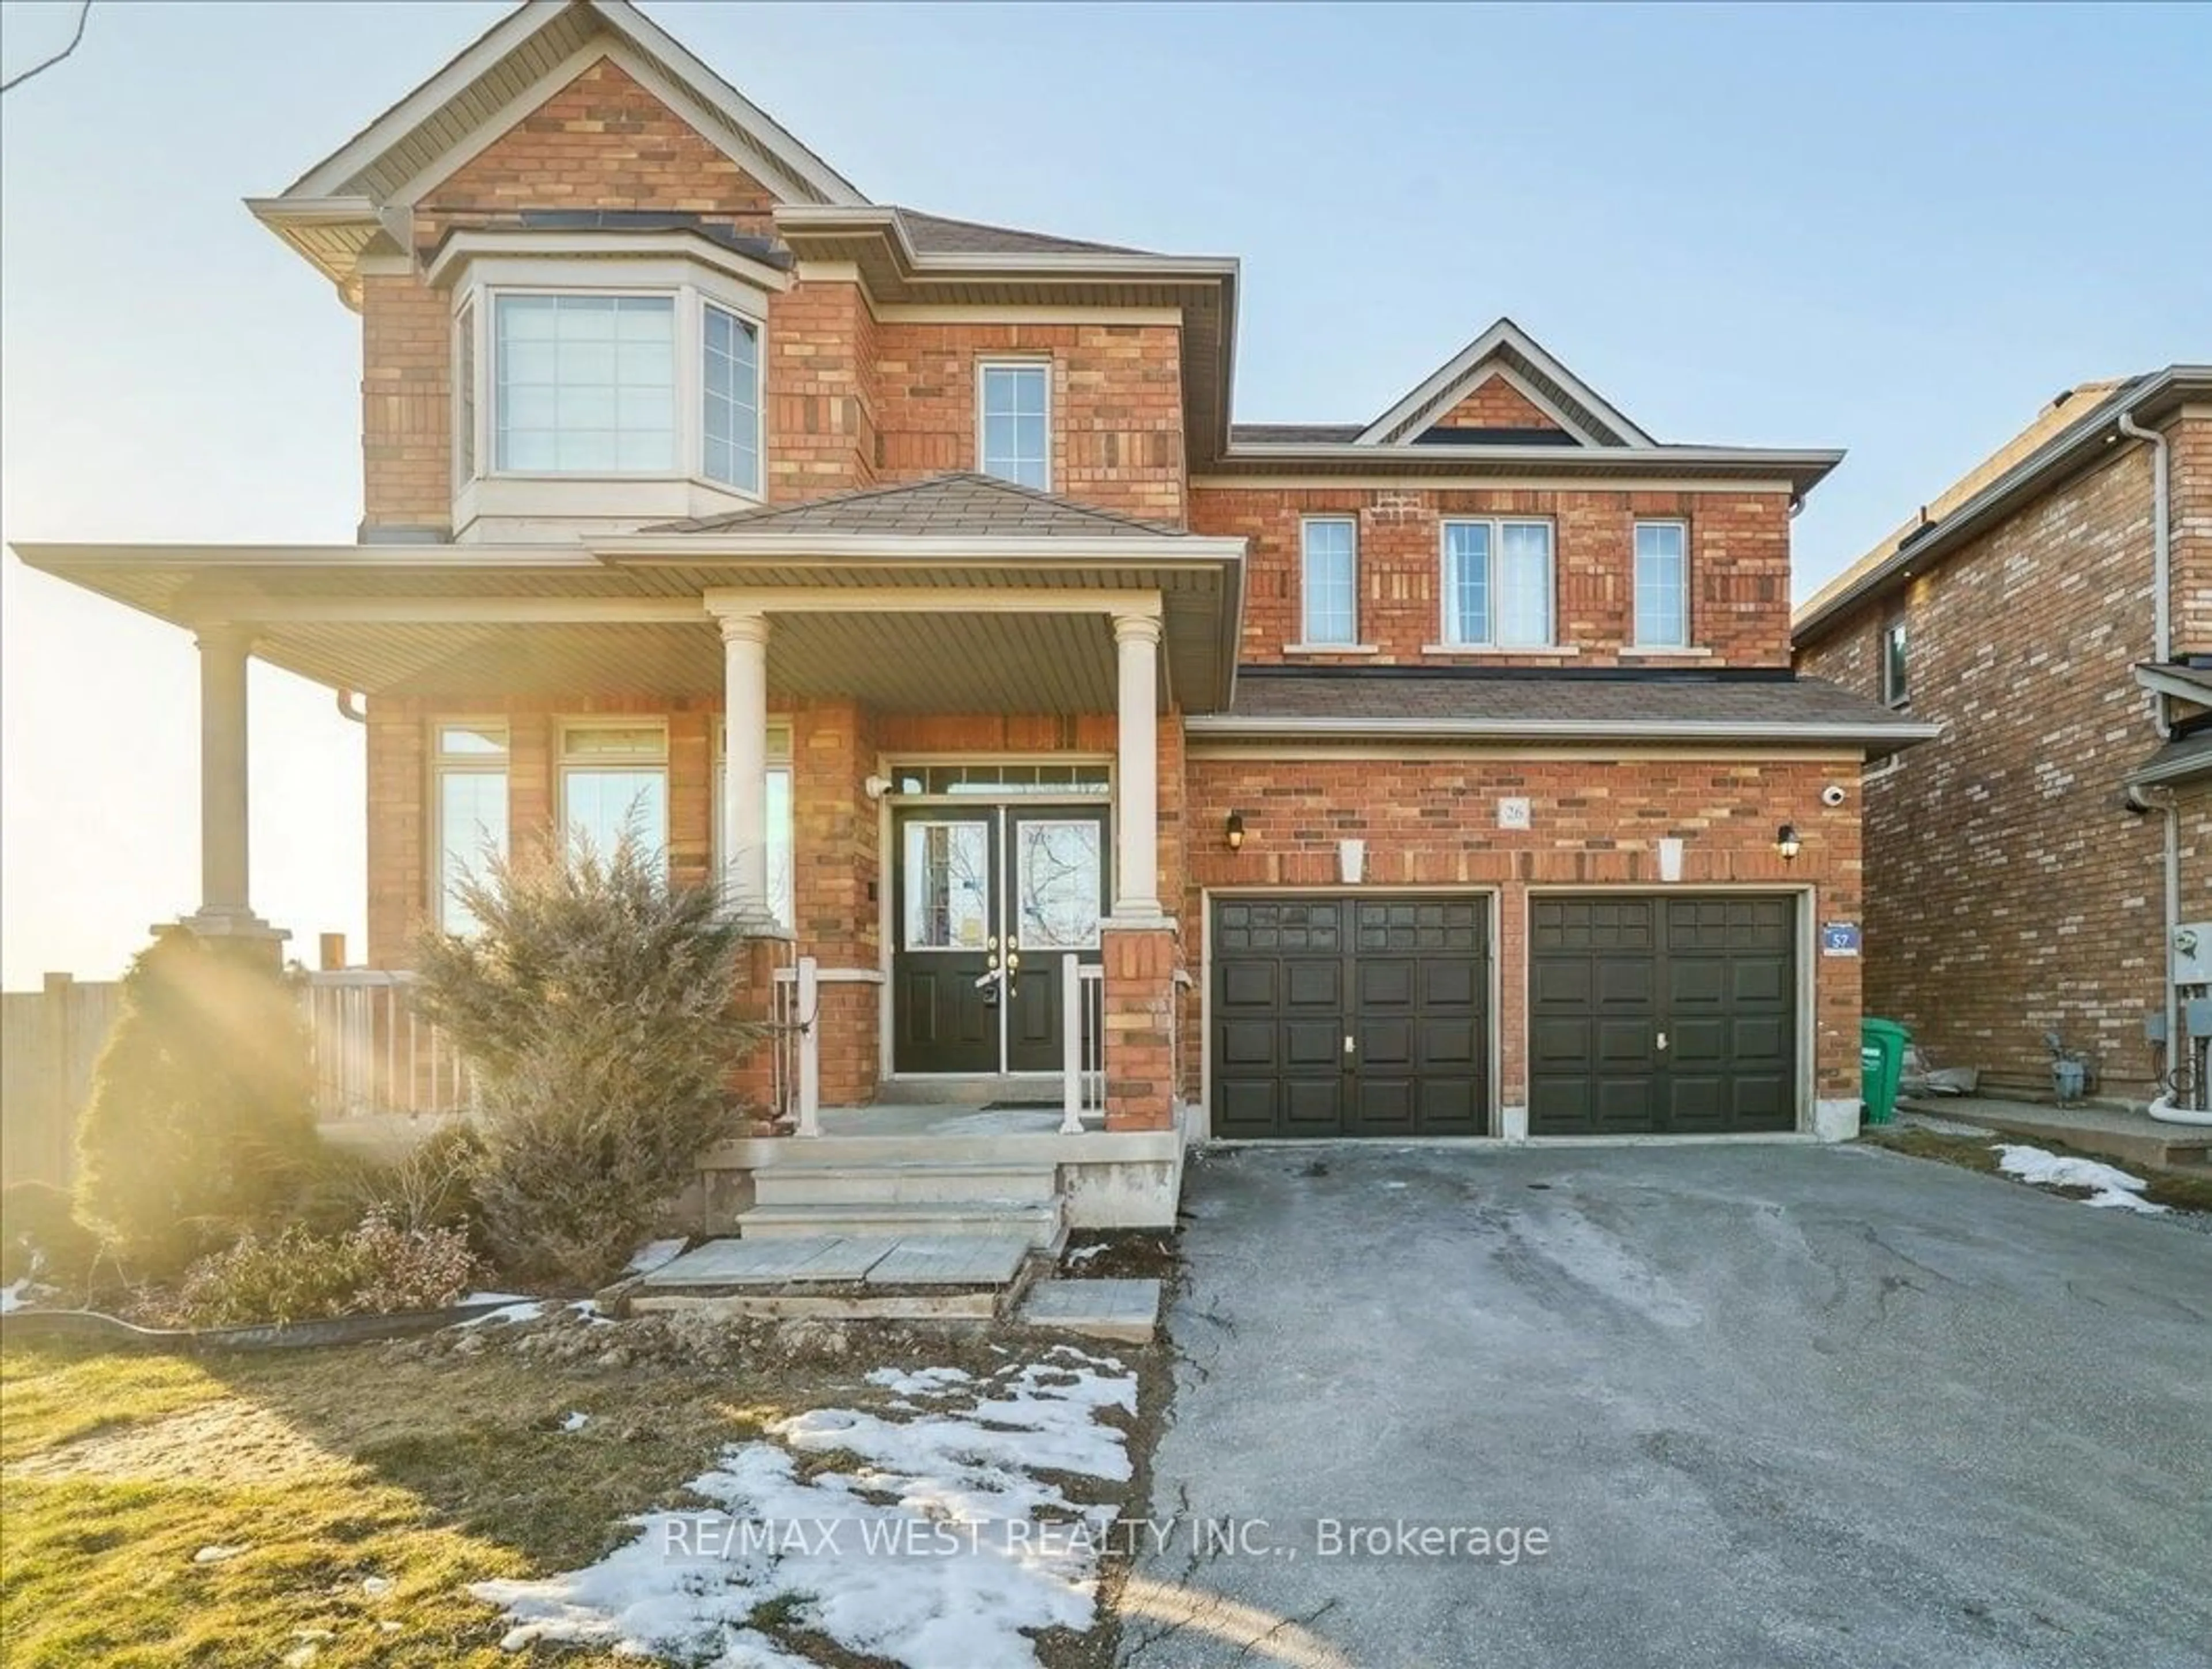 Home with brick exterior material for 26 Clearfield Dr, Brampton Ontario L6P 3L5